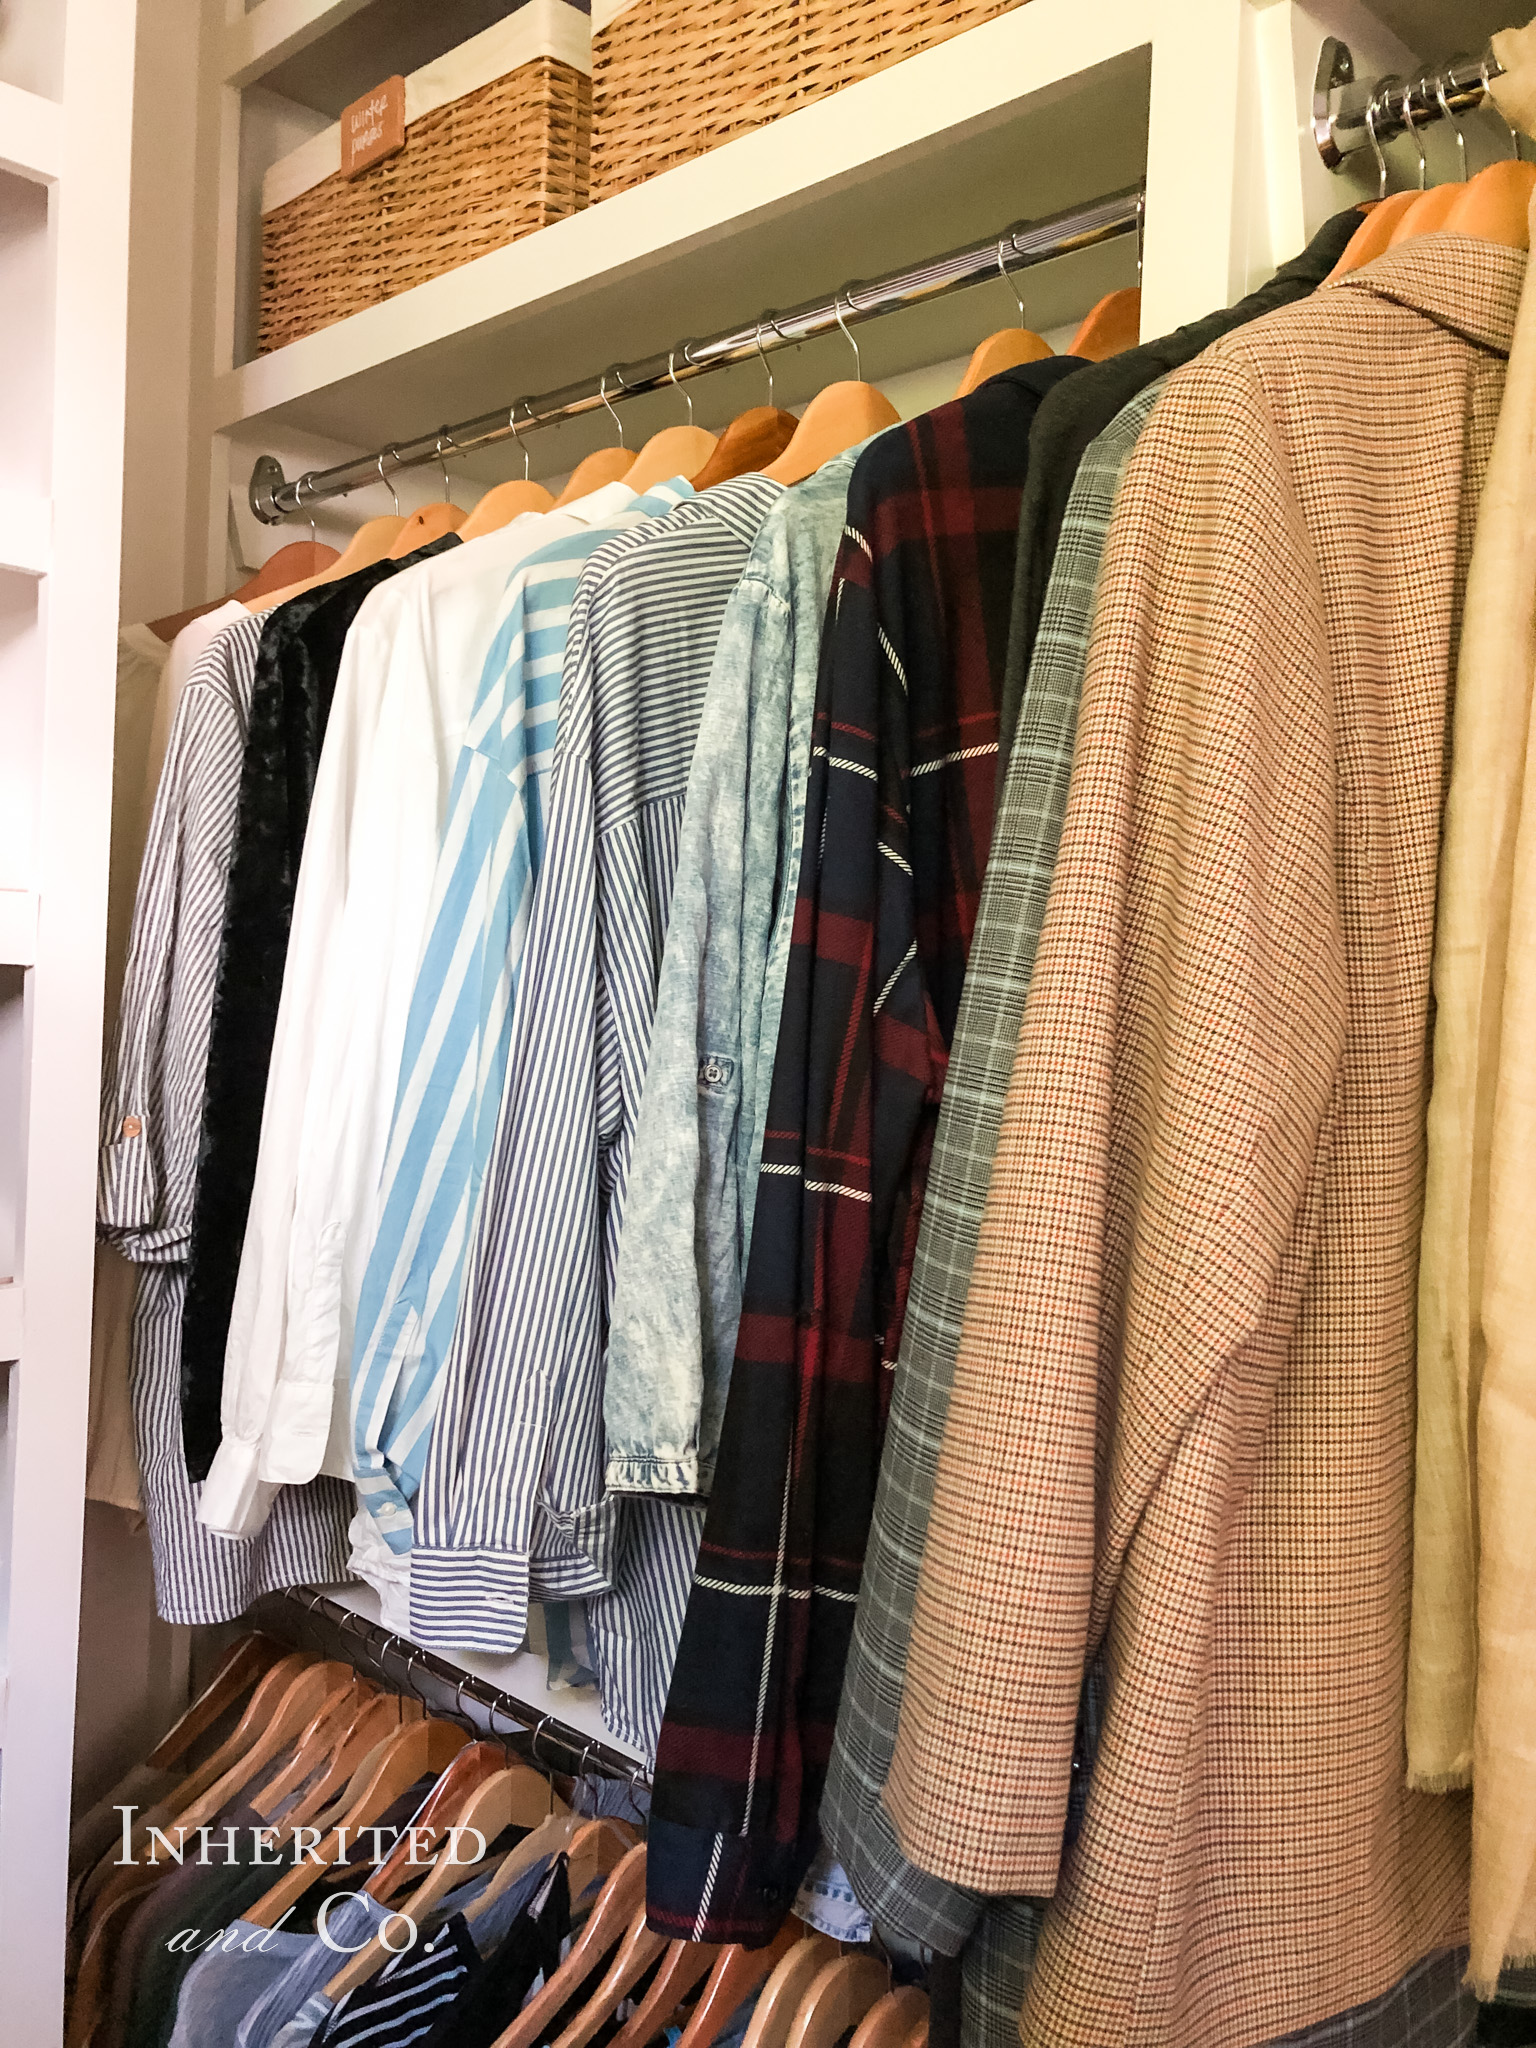 Long-sleeve, button-up shirts in a closet